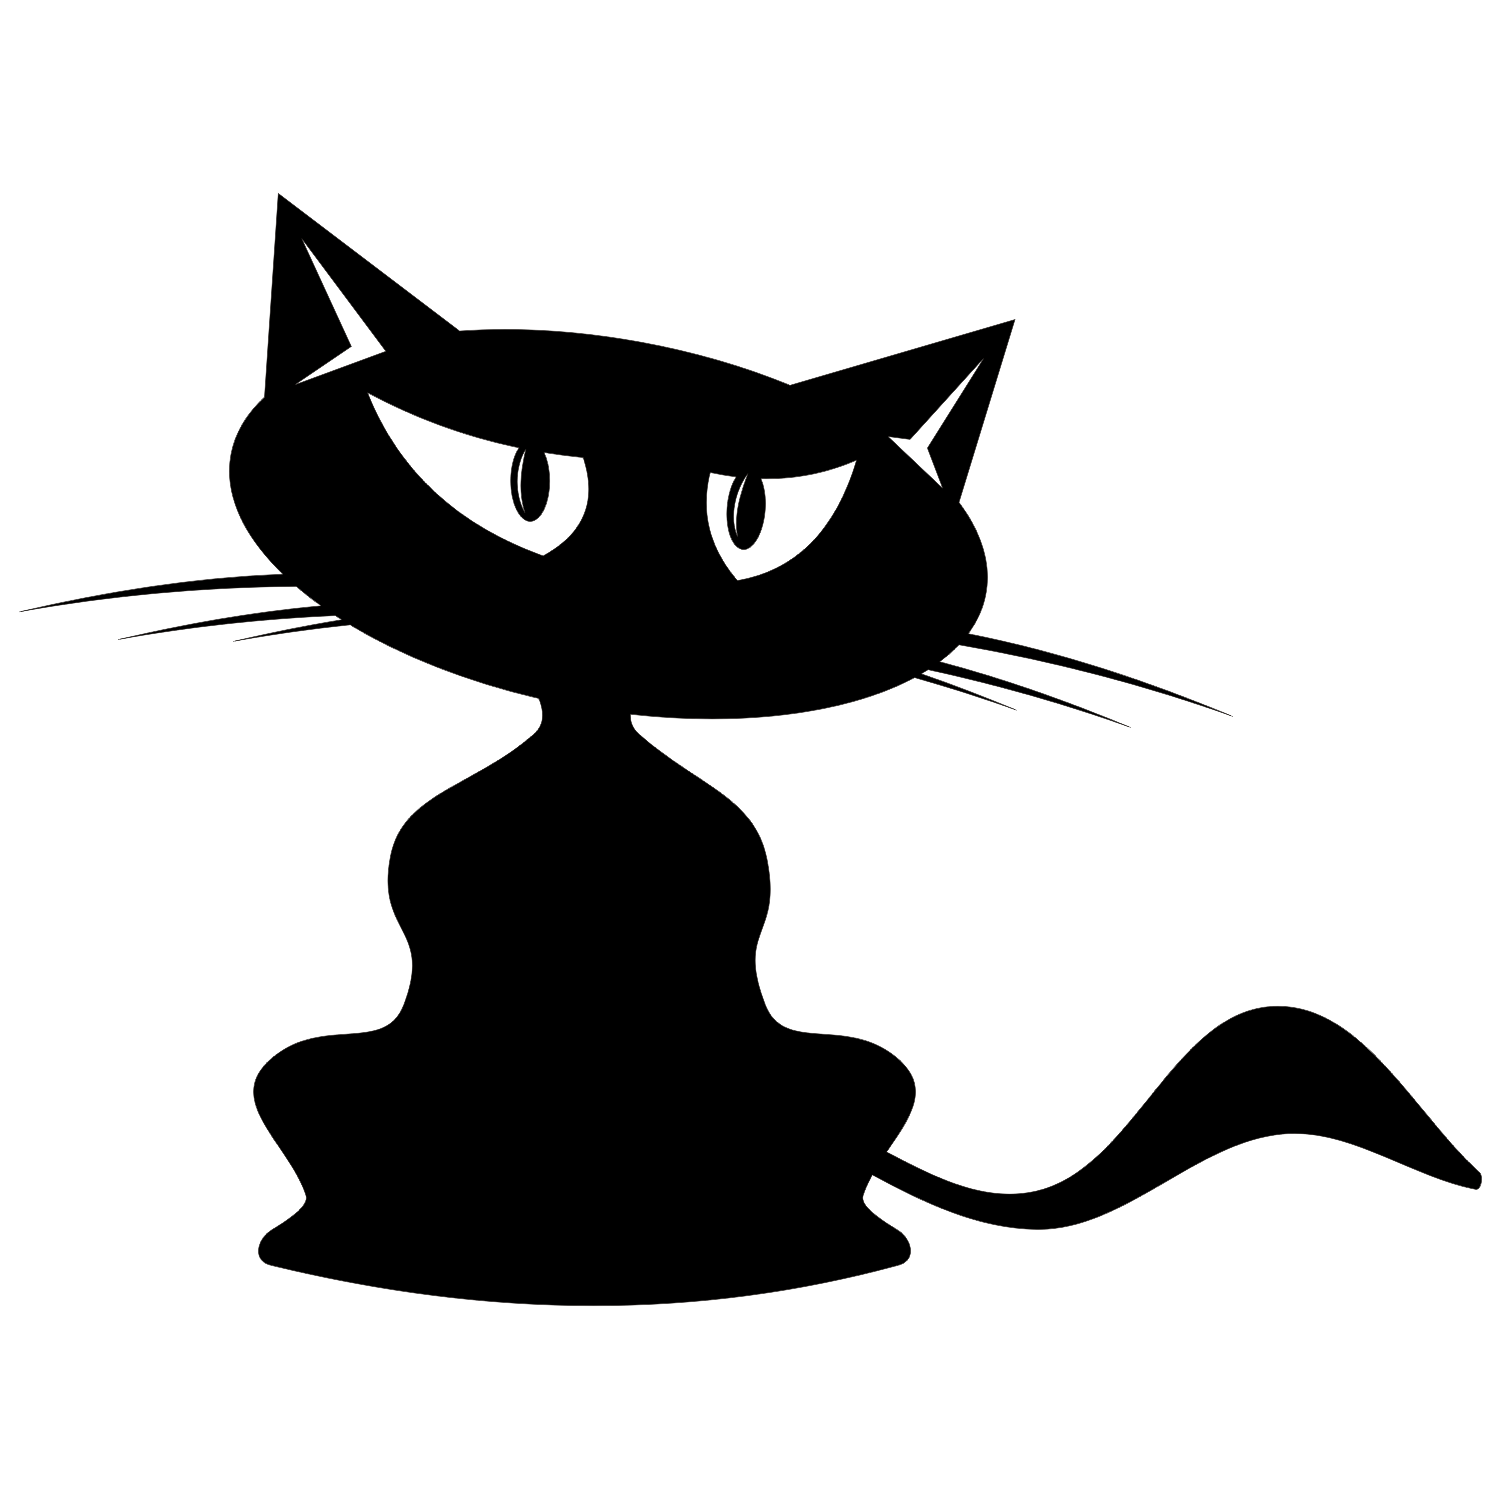 cat vector clipart free - photo #37